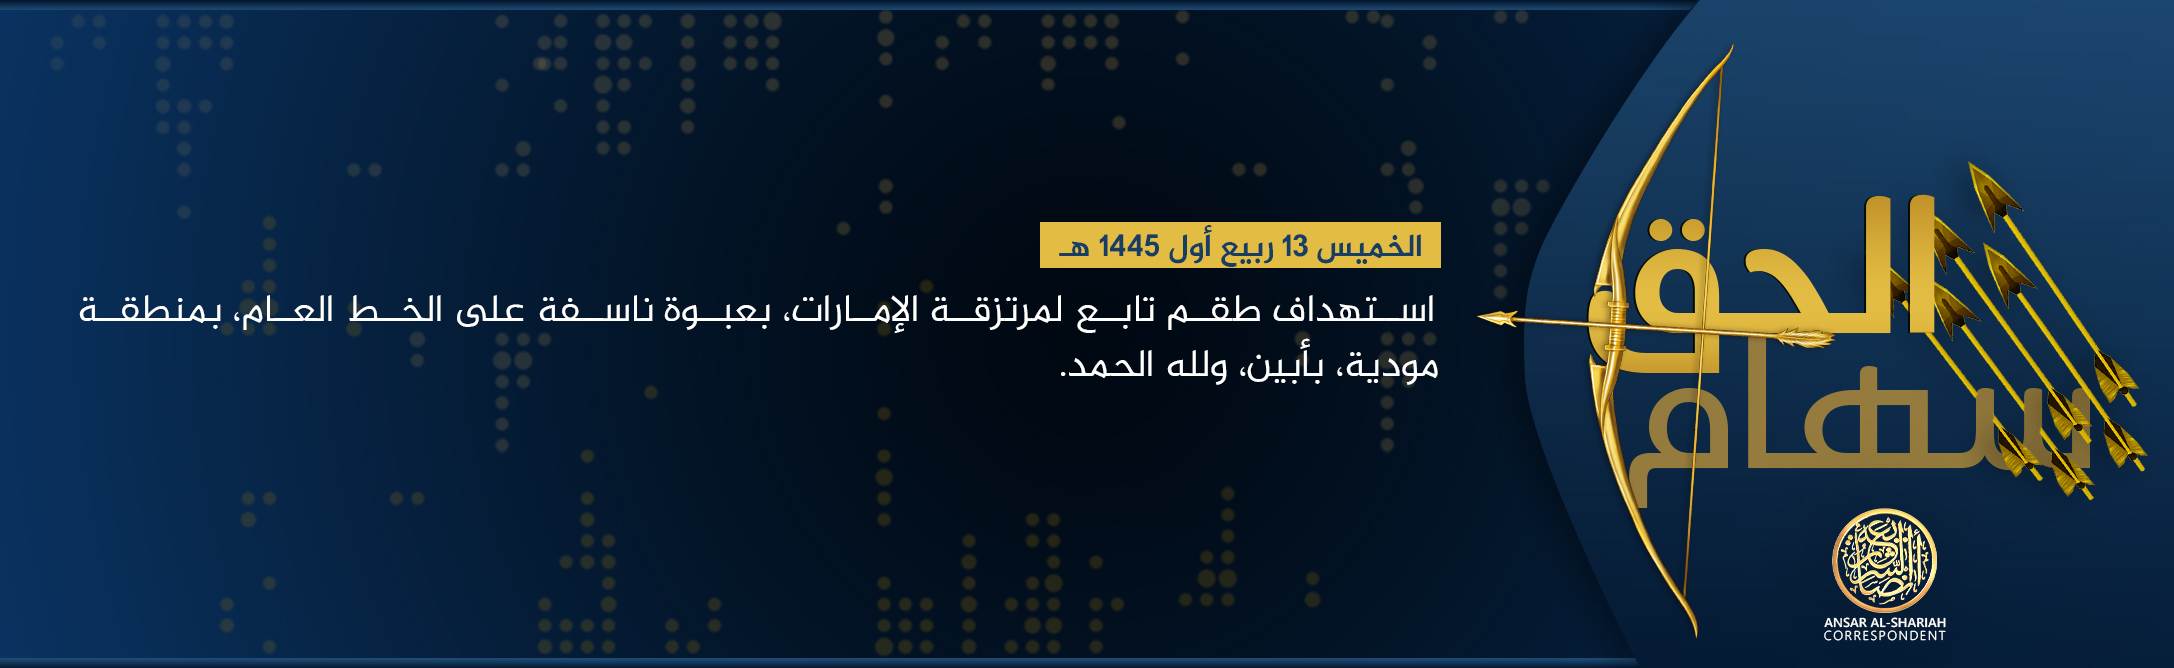 (Claim) Ansar al-Sharia in Yemen (ASY / AQAP / AQY) Targeted Shabwa Defense Forces With IED on the Main Road in Mudiyah, Abyan, Yemen - 28 September 2023